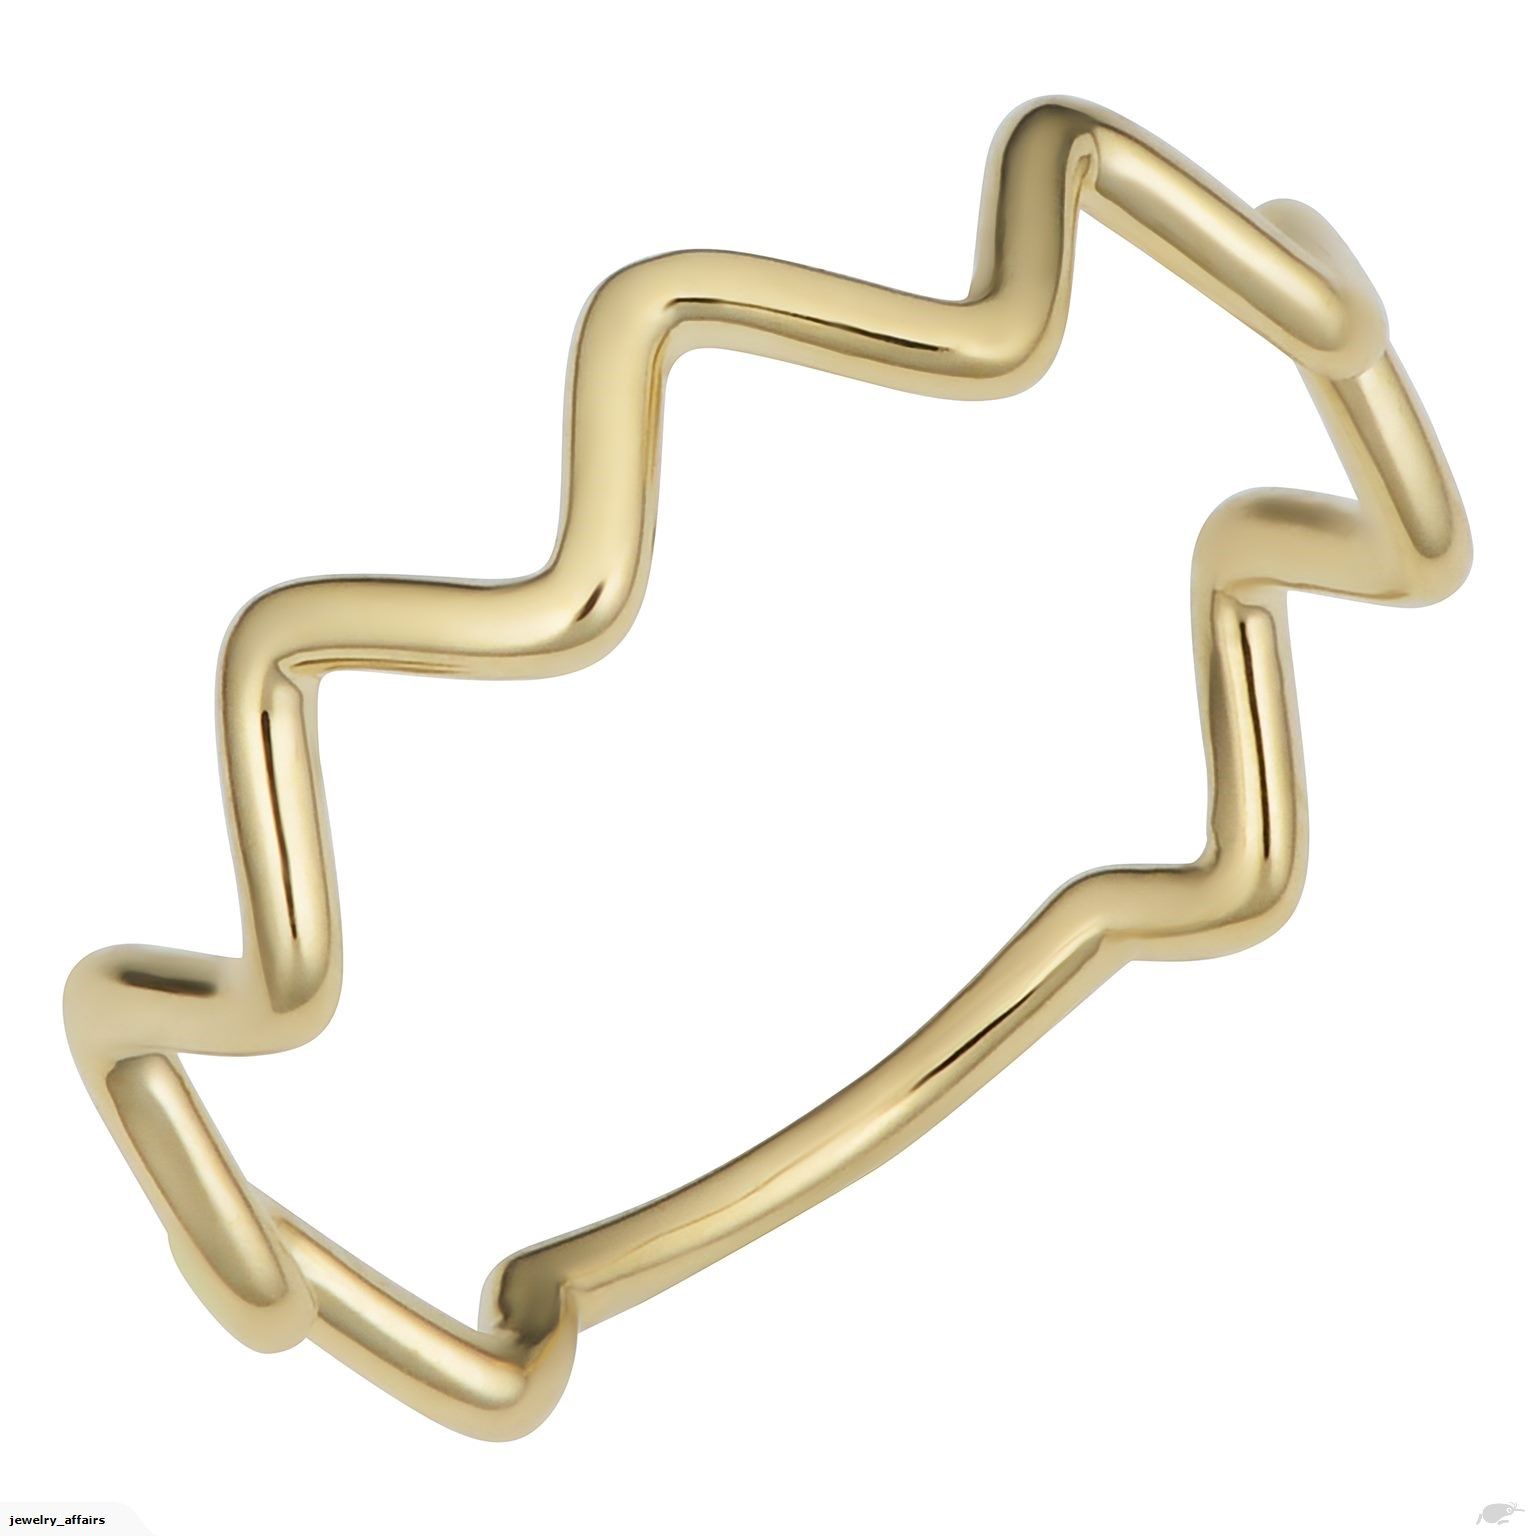 14k Yellow Gold Zigzag Curves Ring Intended For Most Current Polished Zigzag Rings (View 18 of 25)